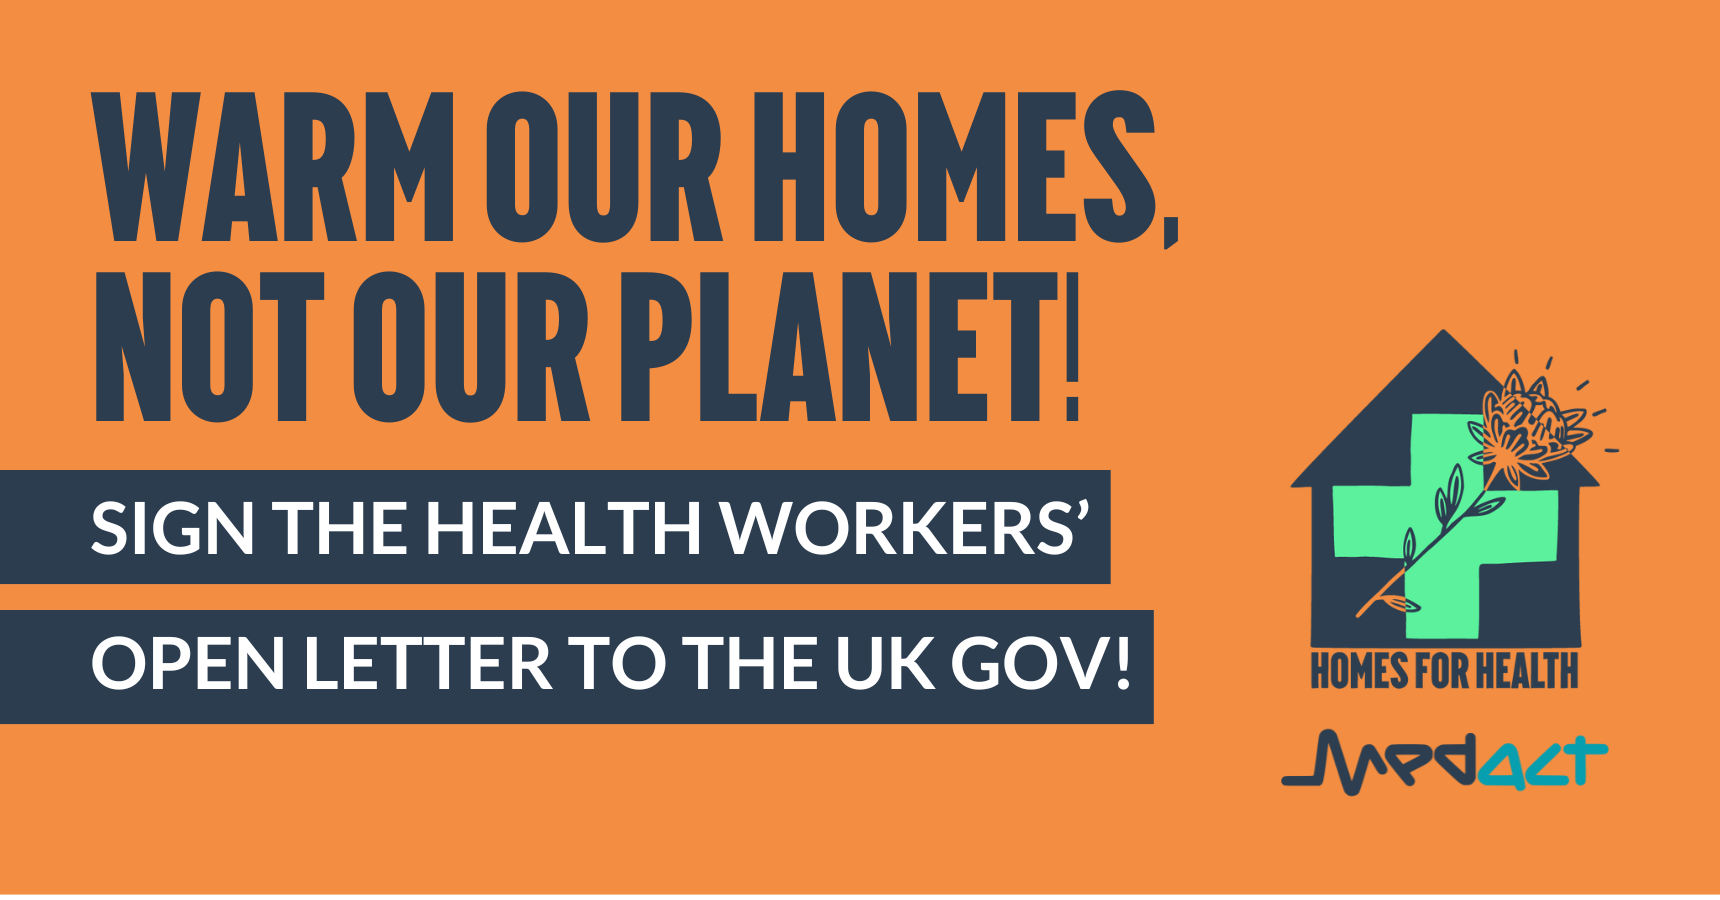 Warm Our Homes, Not Our Planet! Sign the Open Letter